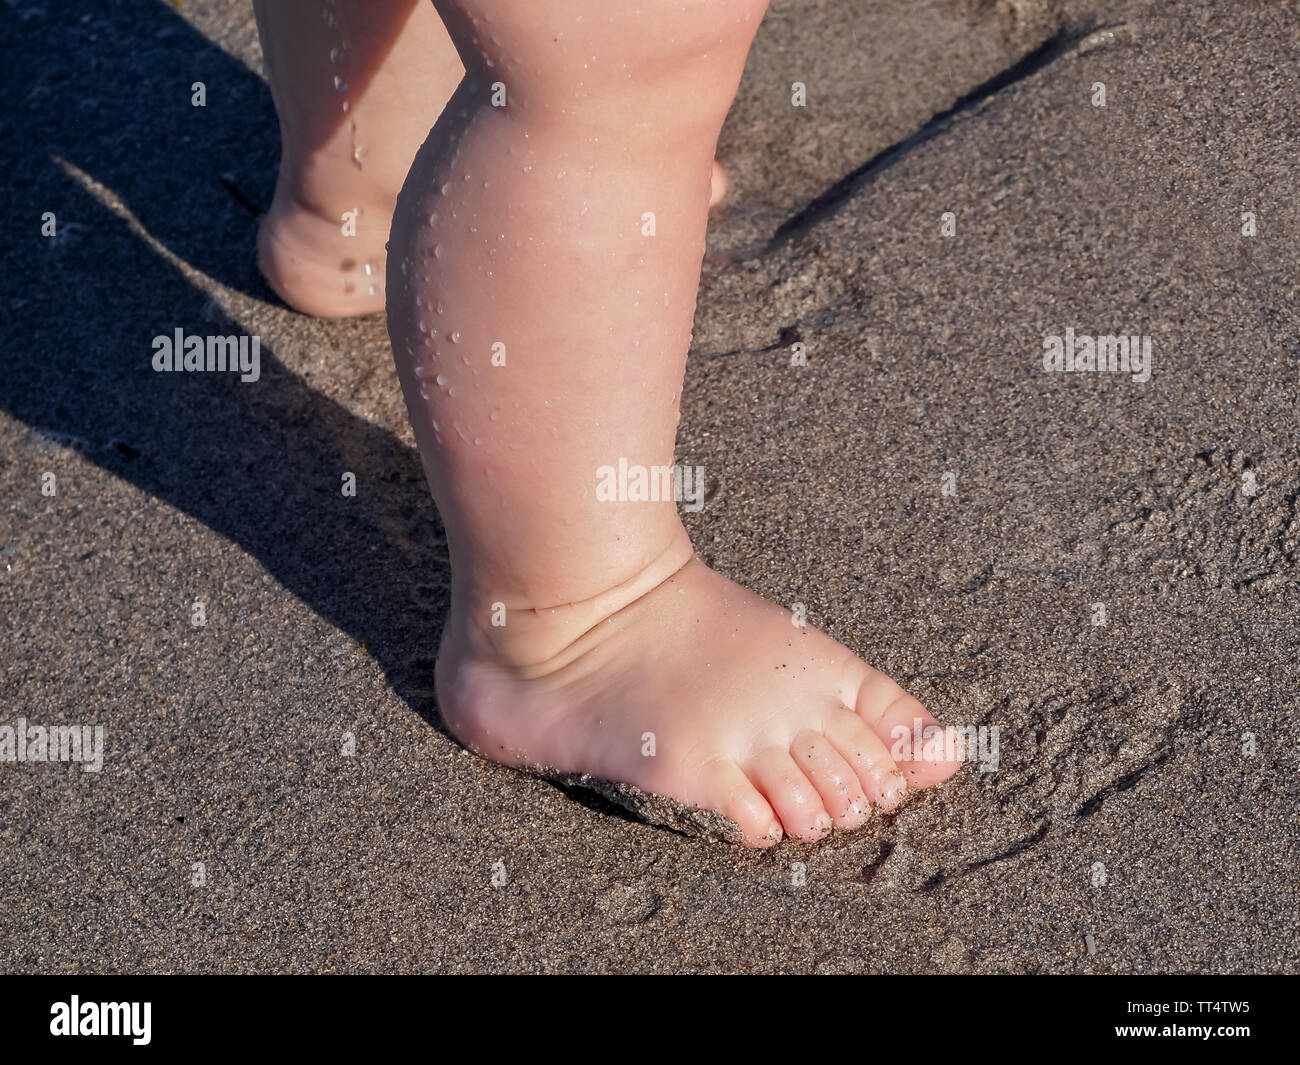 A young child's feet at the beach on the island of Key Biscayne, Florida, USA. Stock Photo